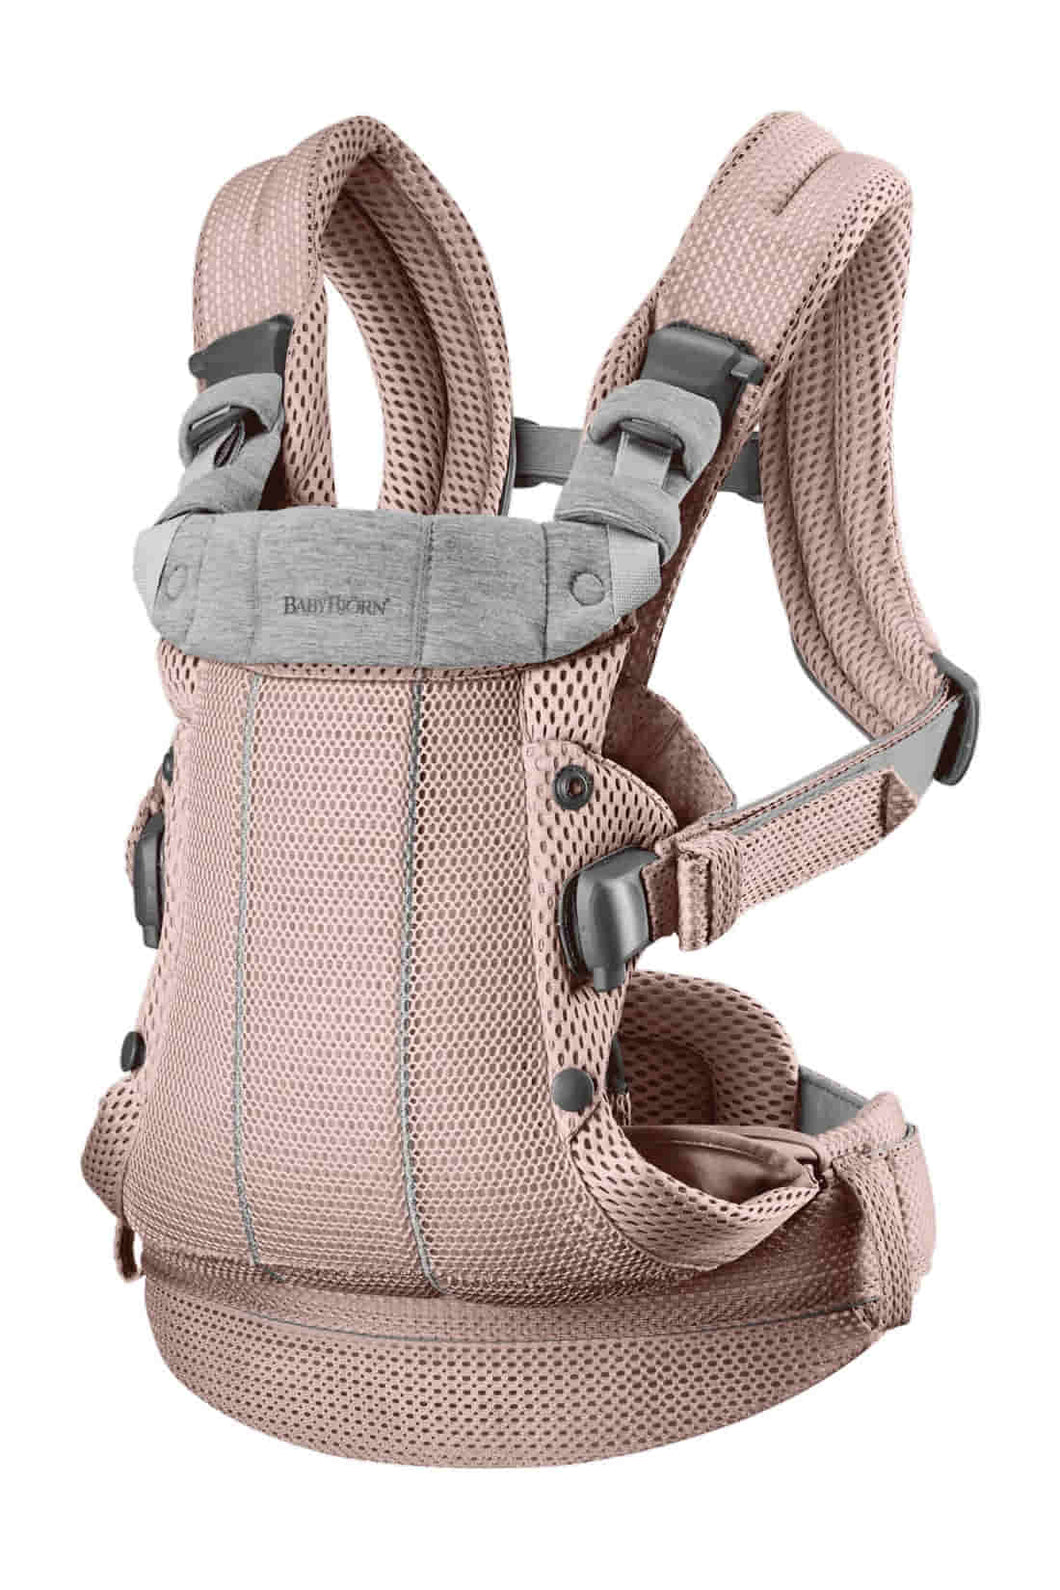 BabyBjorn Baby Carrier Harmony Dusty Pink 3D Mesh 1